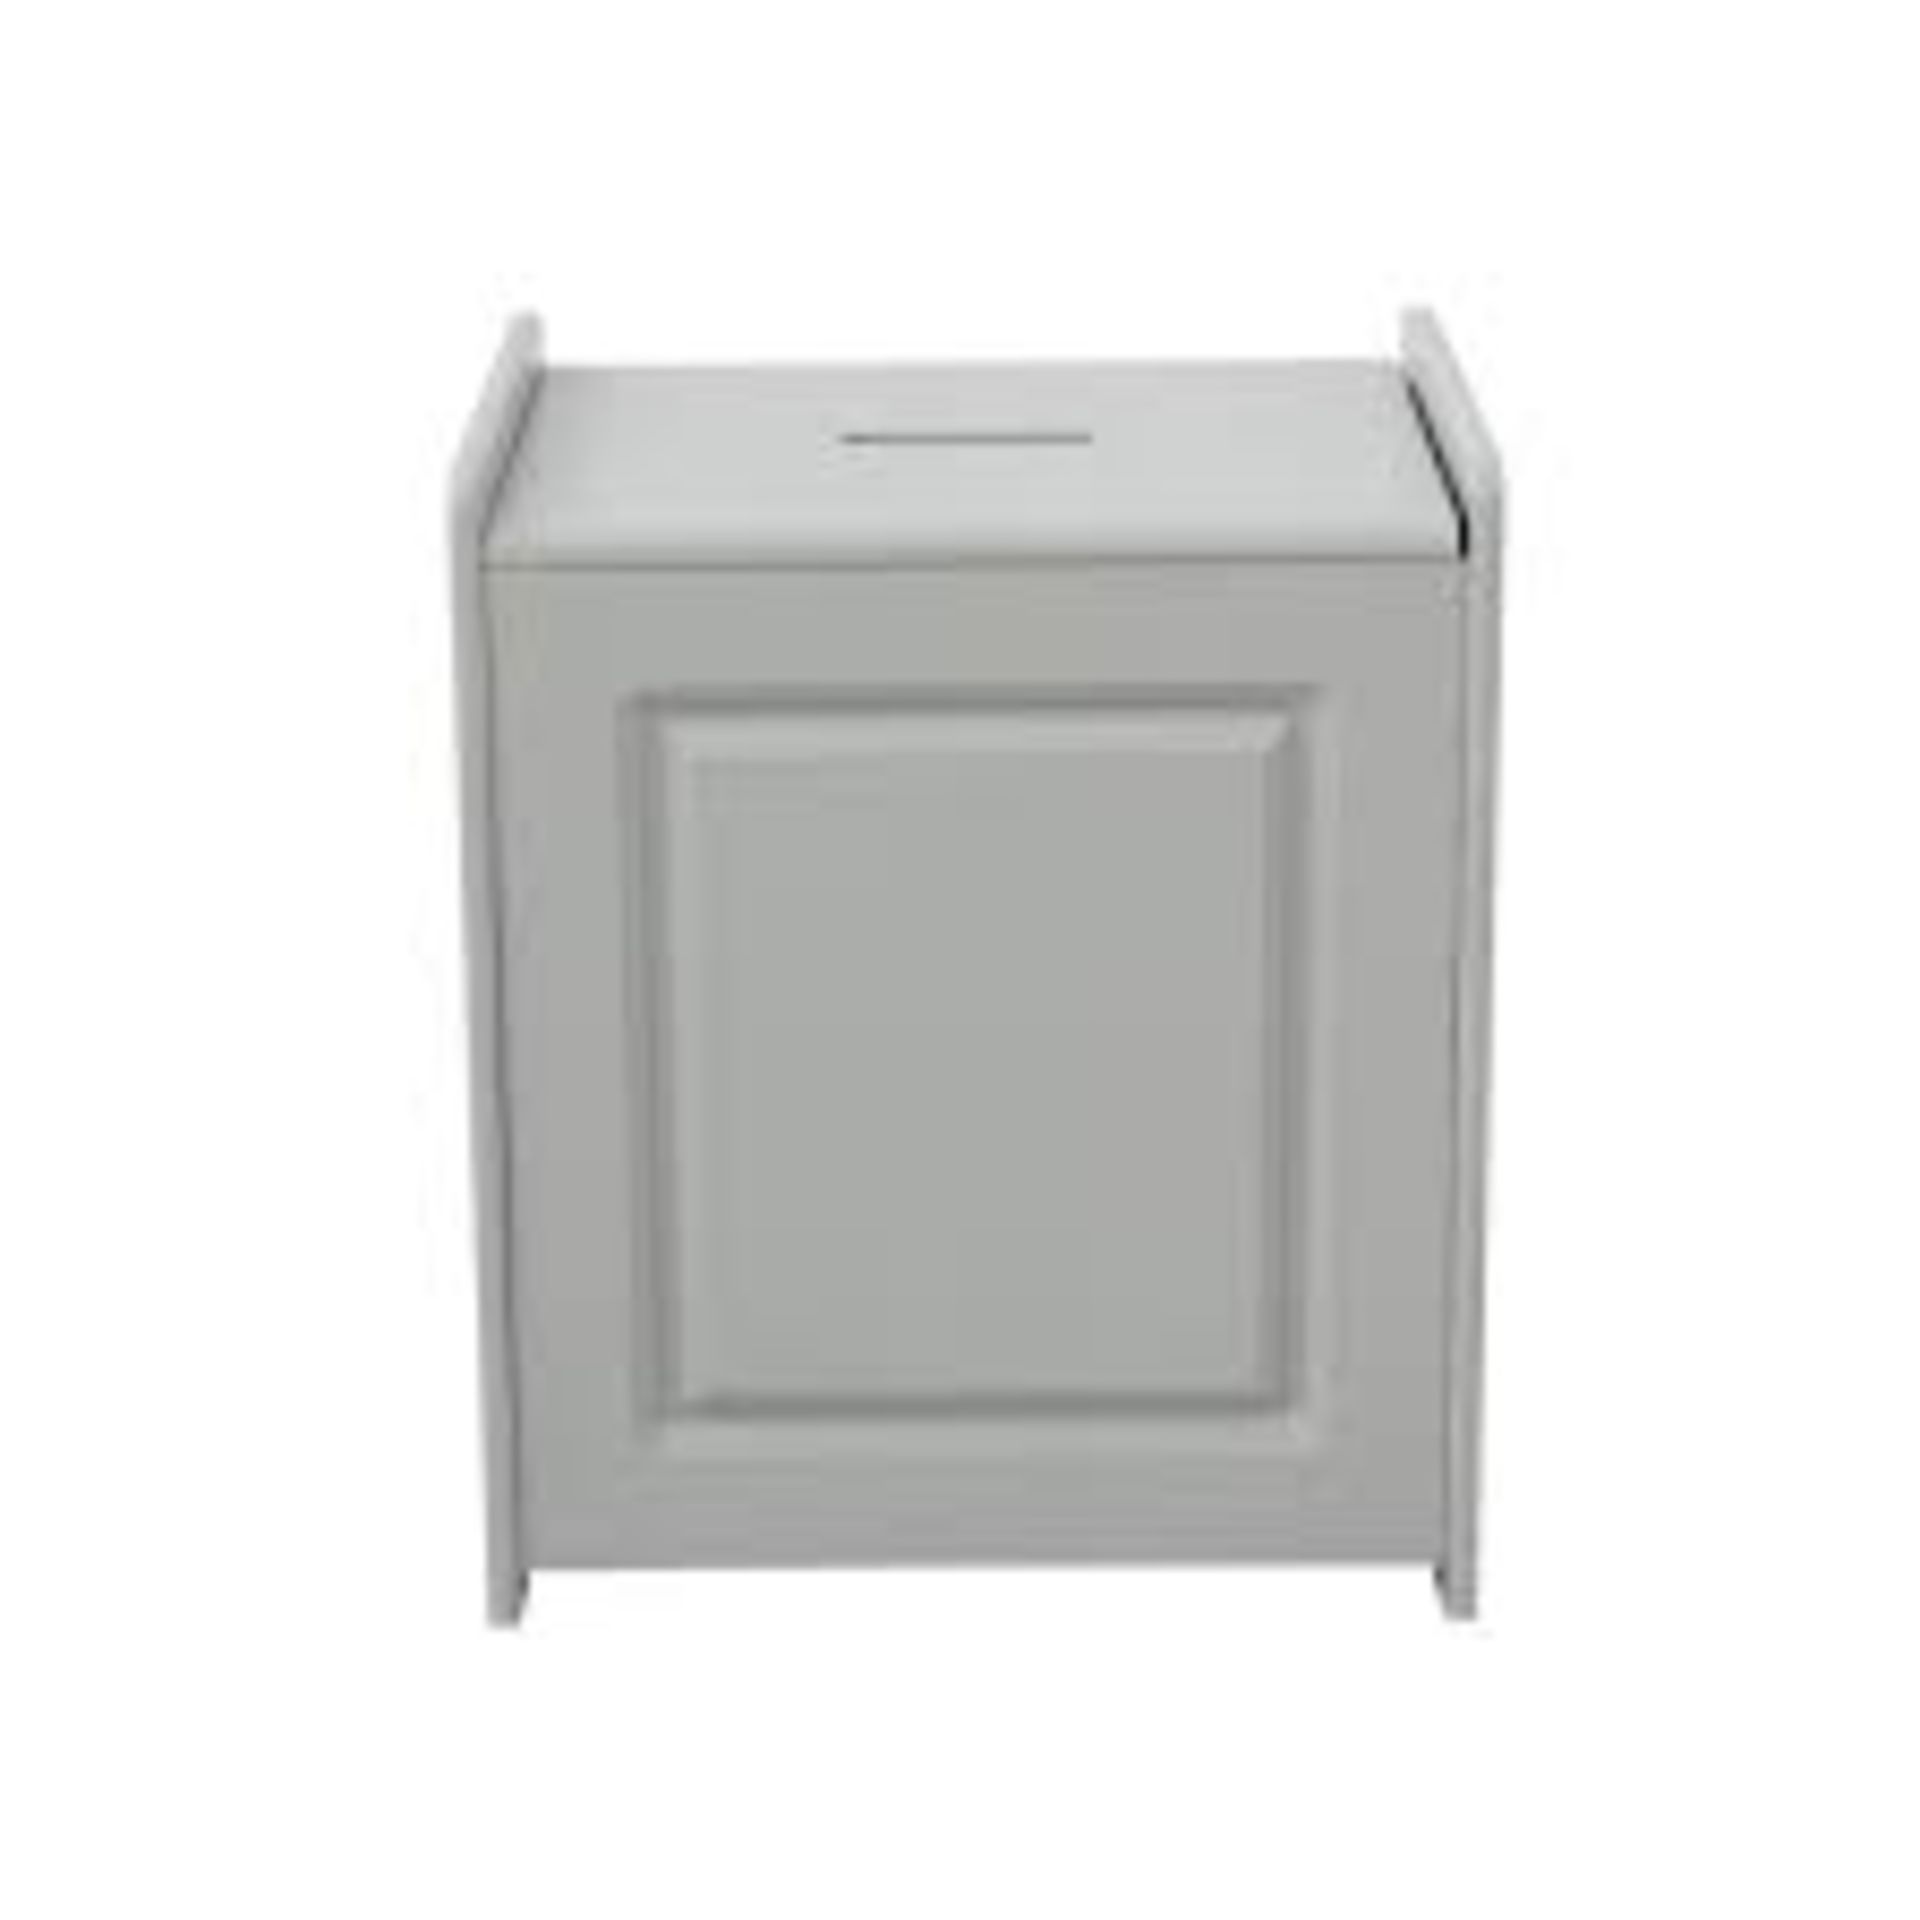 Coughton Grey Laundry Basket Ottoman. - SR3. The Coughton Lidded Laundry Hamper is an aesthetic